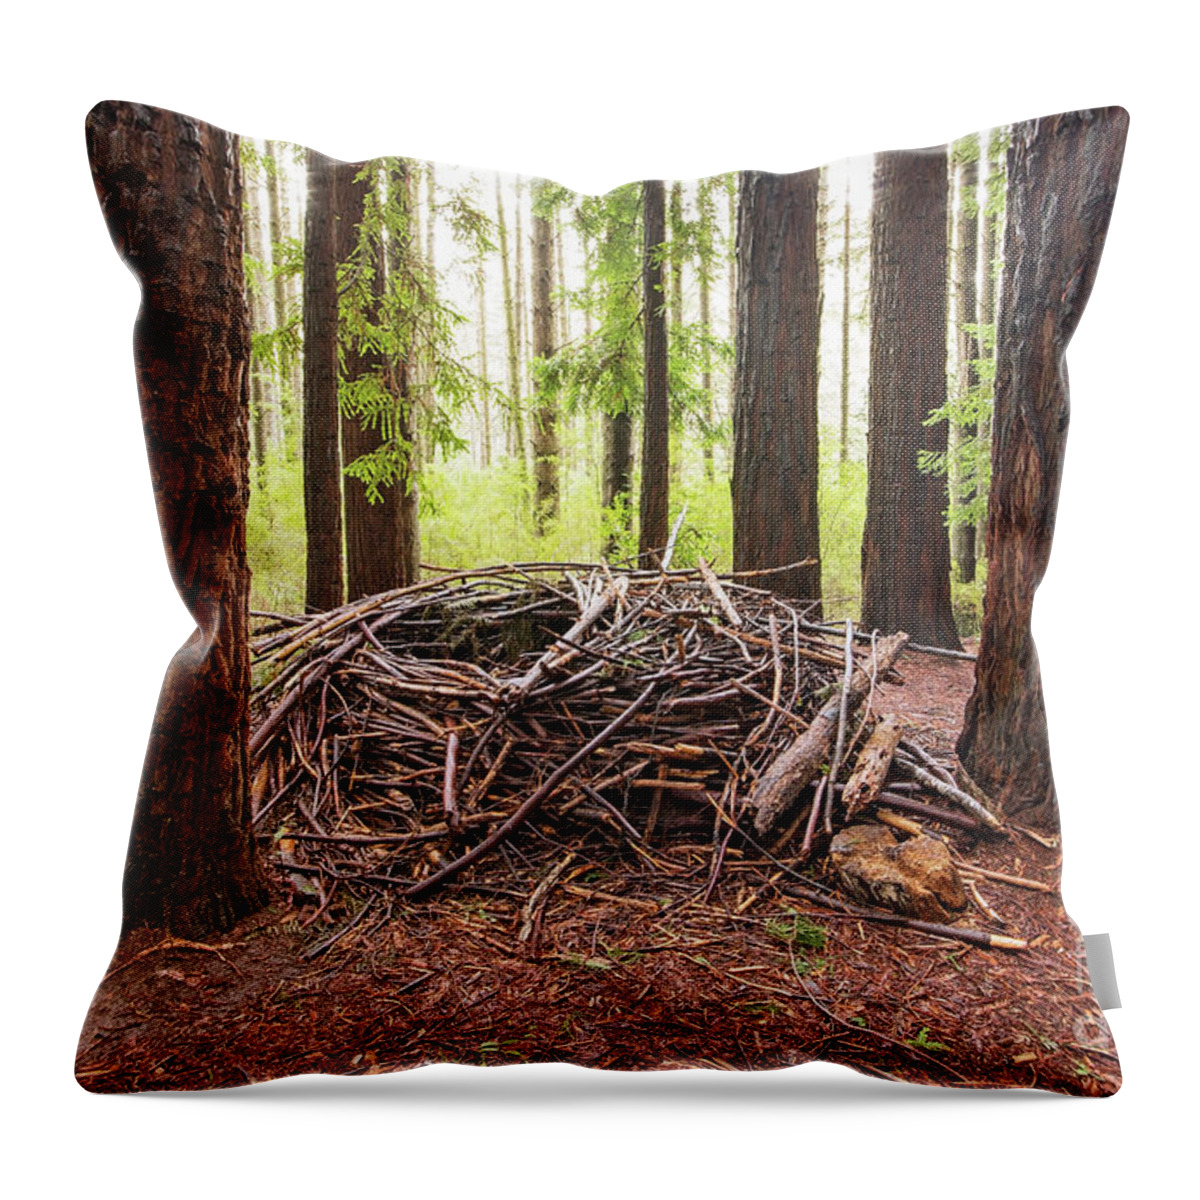 Redwood Throw Pillow featuring the photograph Wild and Woven by Linda Lees